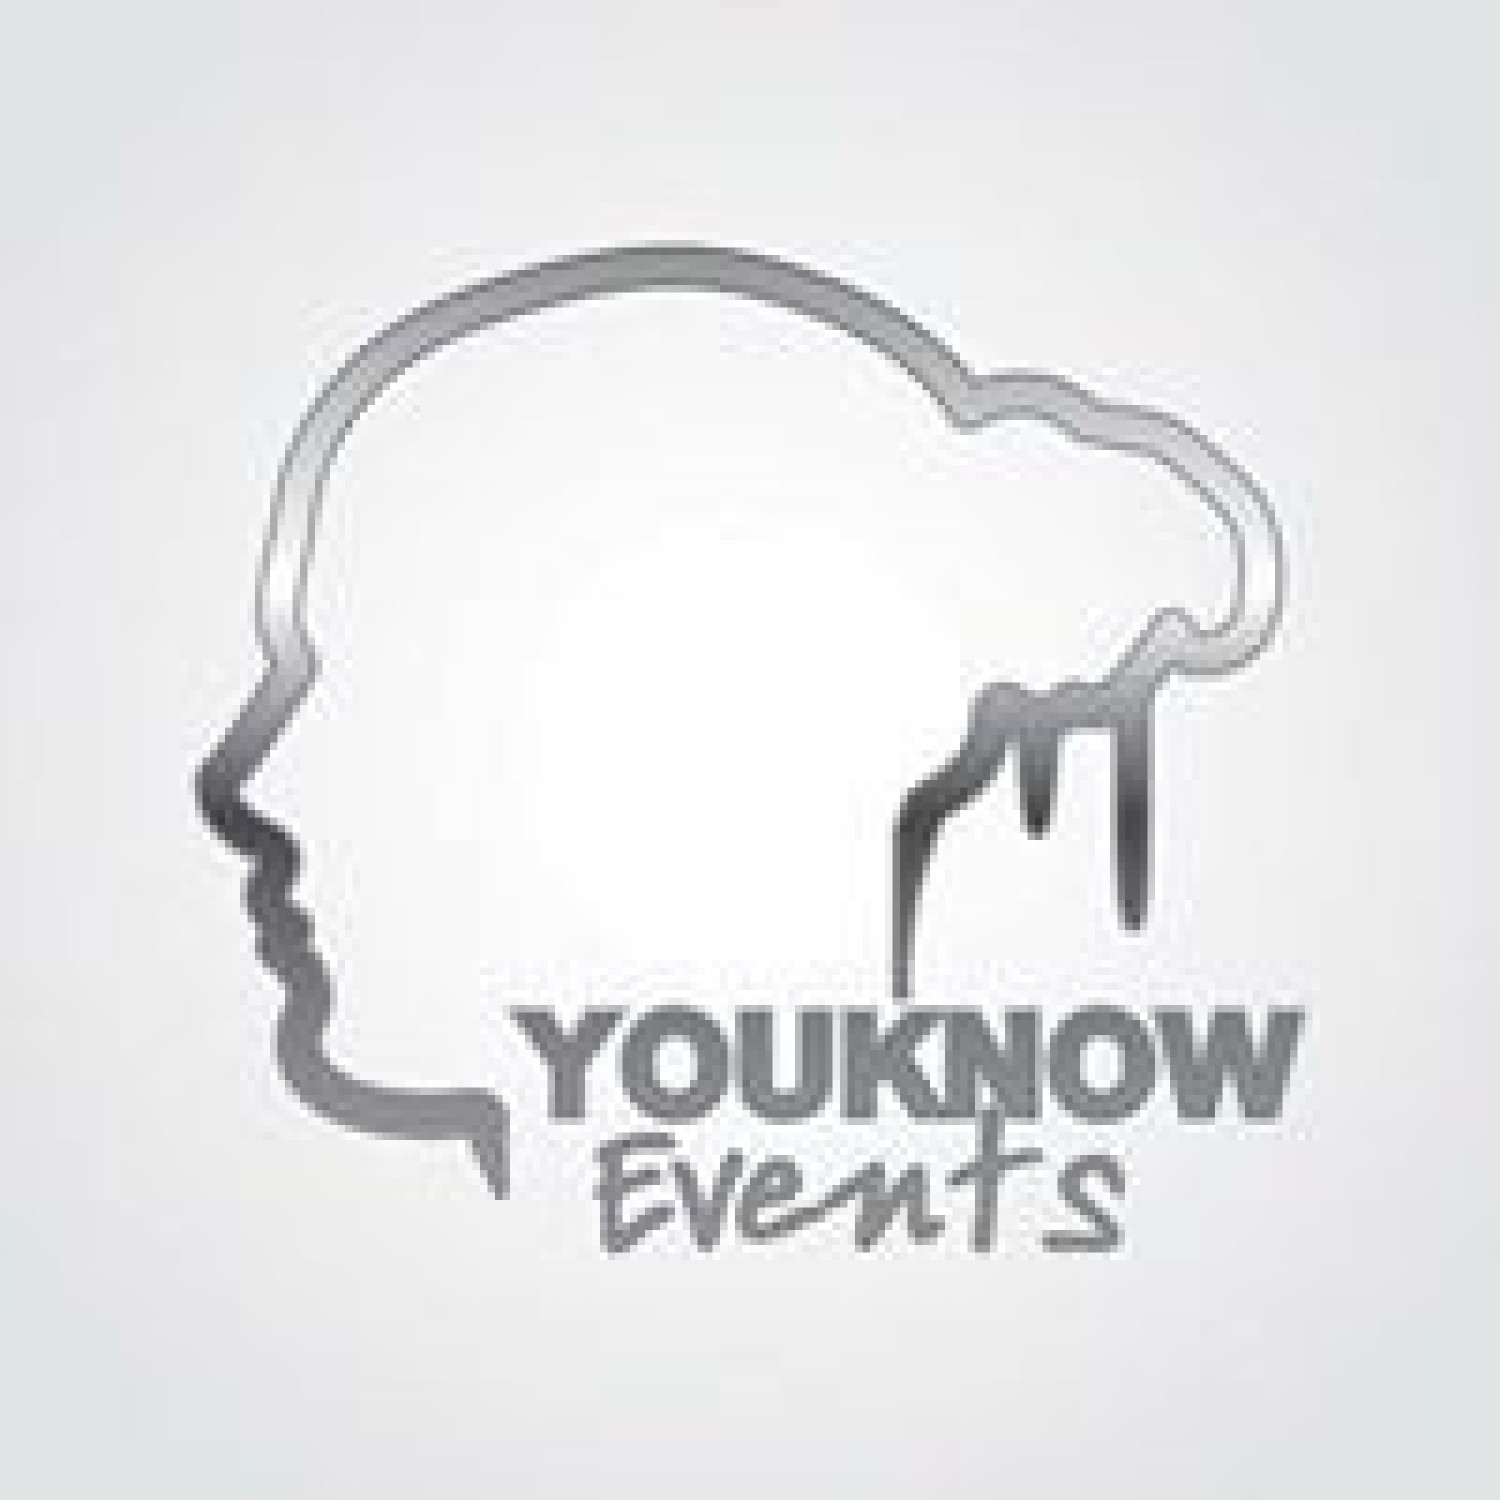 Youknow events